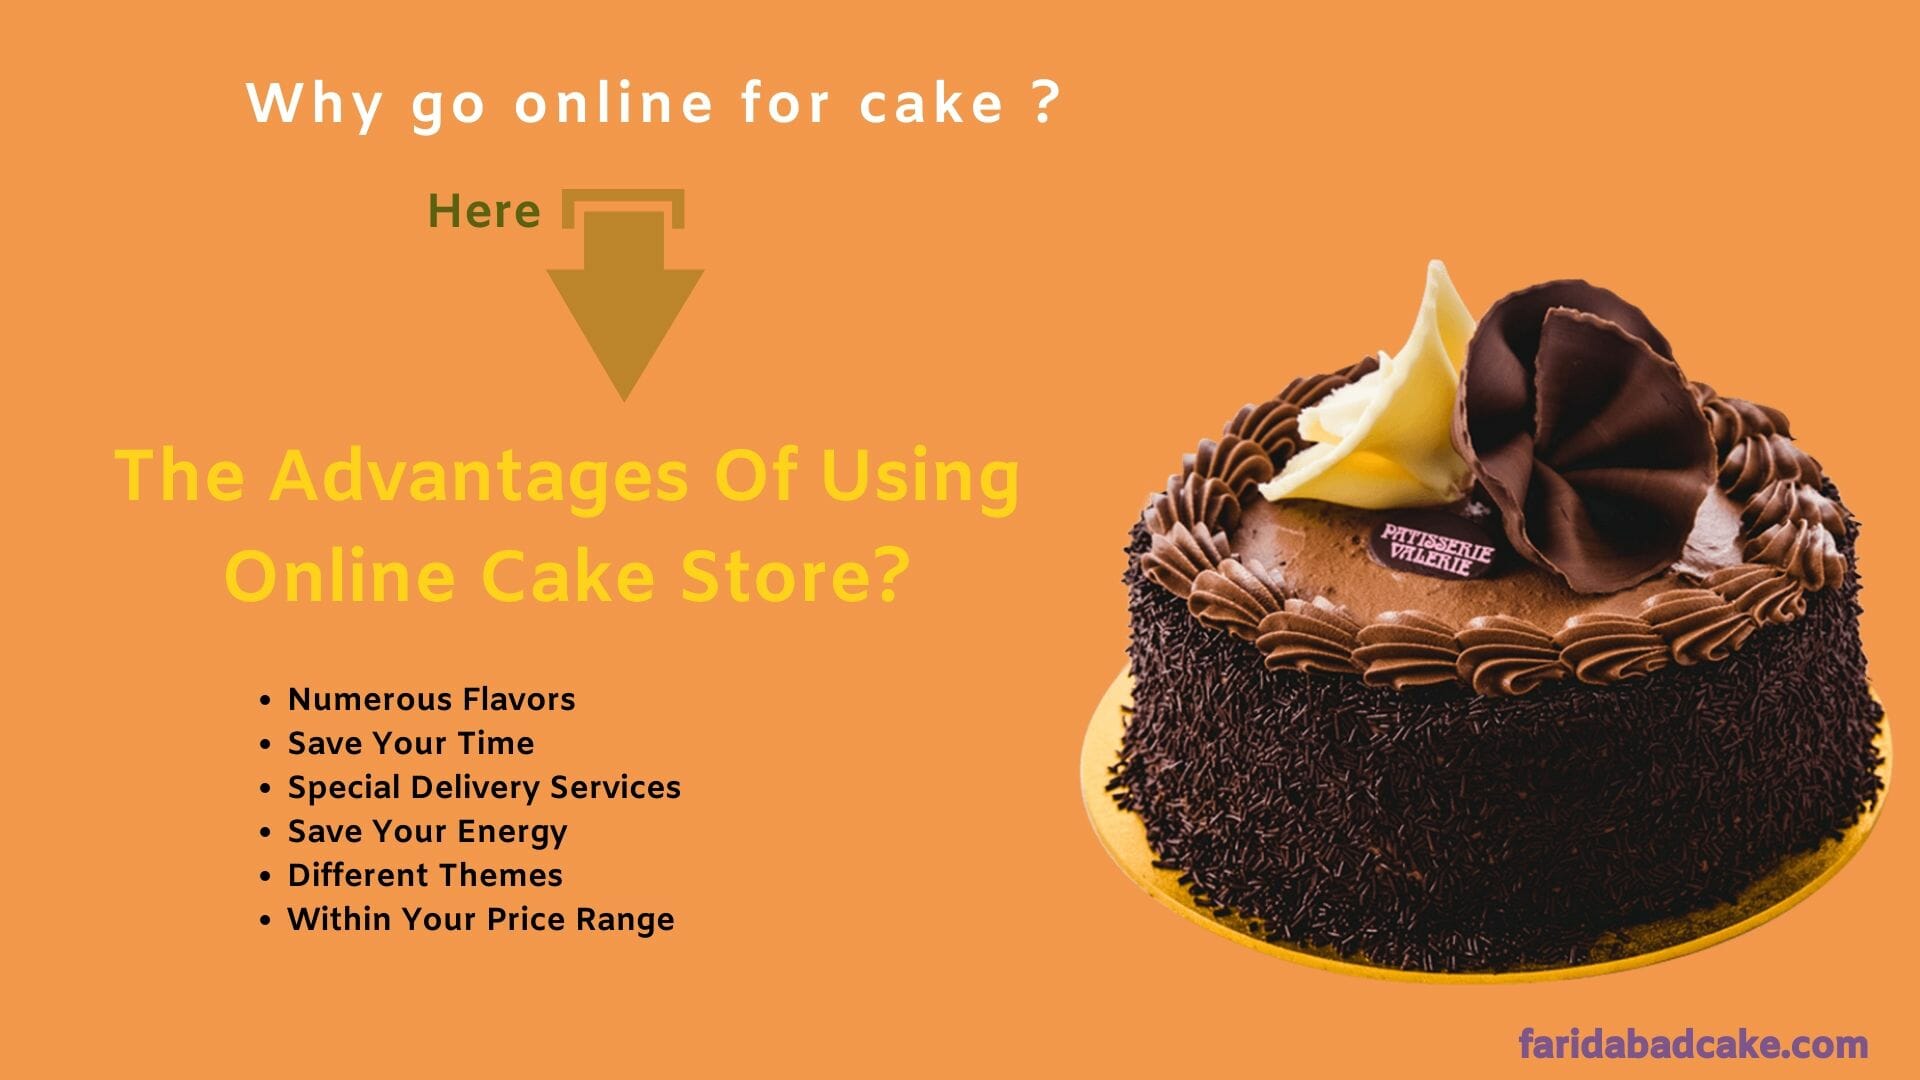 What Are The Advantages Of Using Online Cake Store?